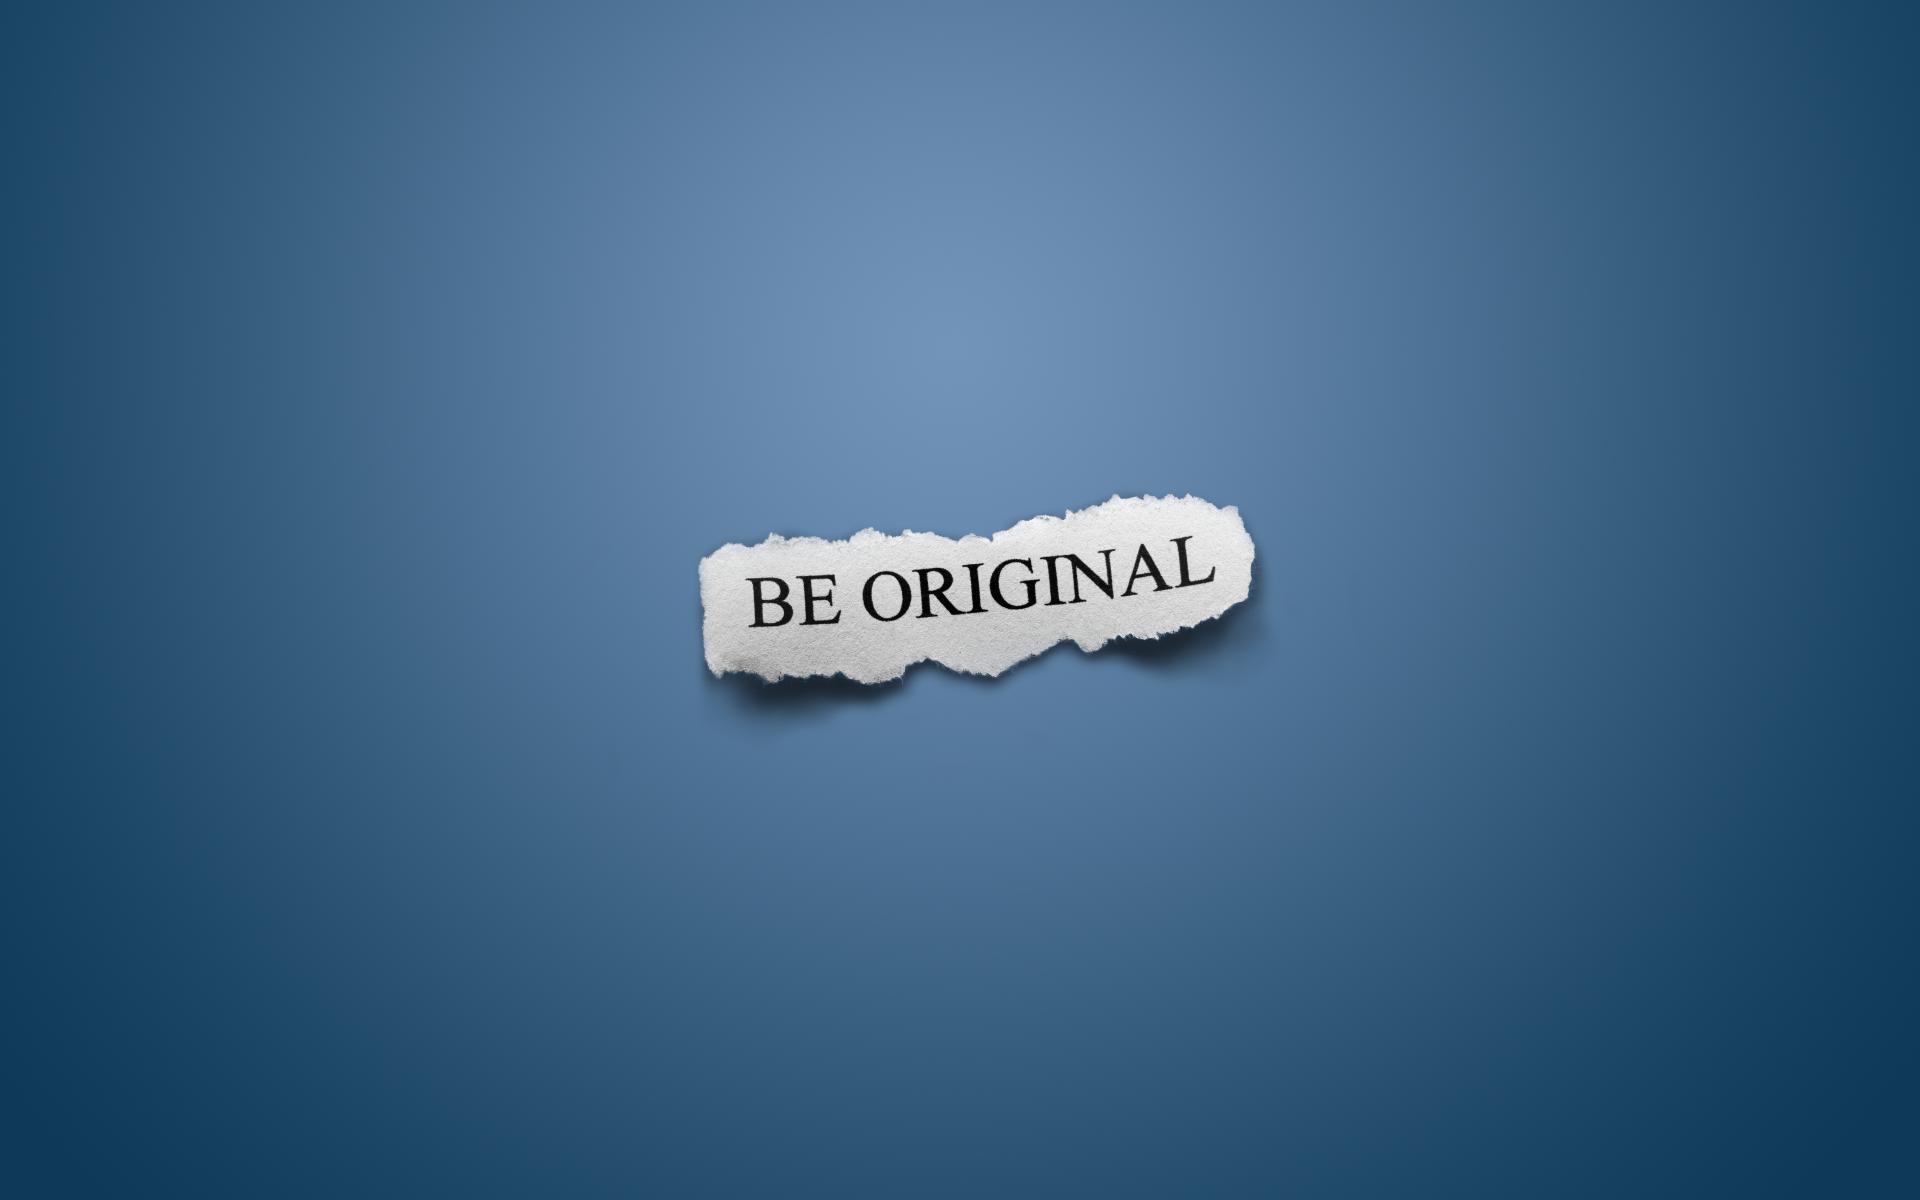 Colorful abstract design with the words 'Be original' on a high resolution desktop wallpaper.